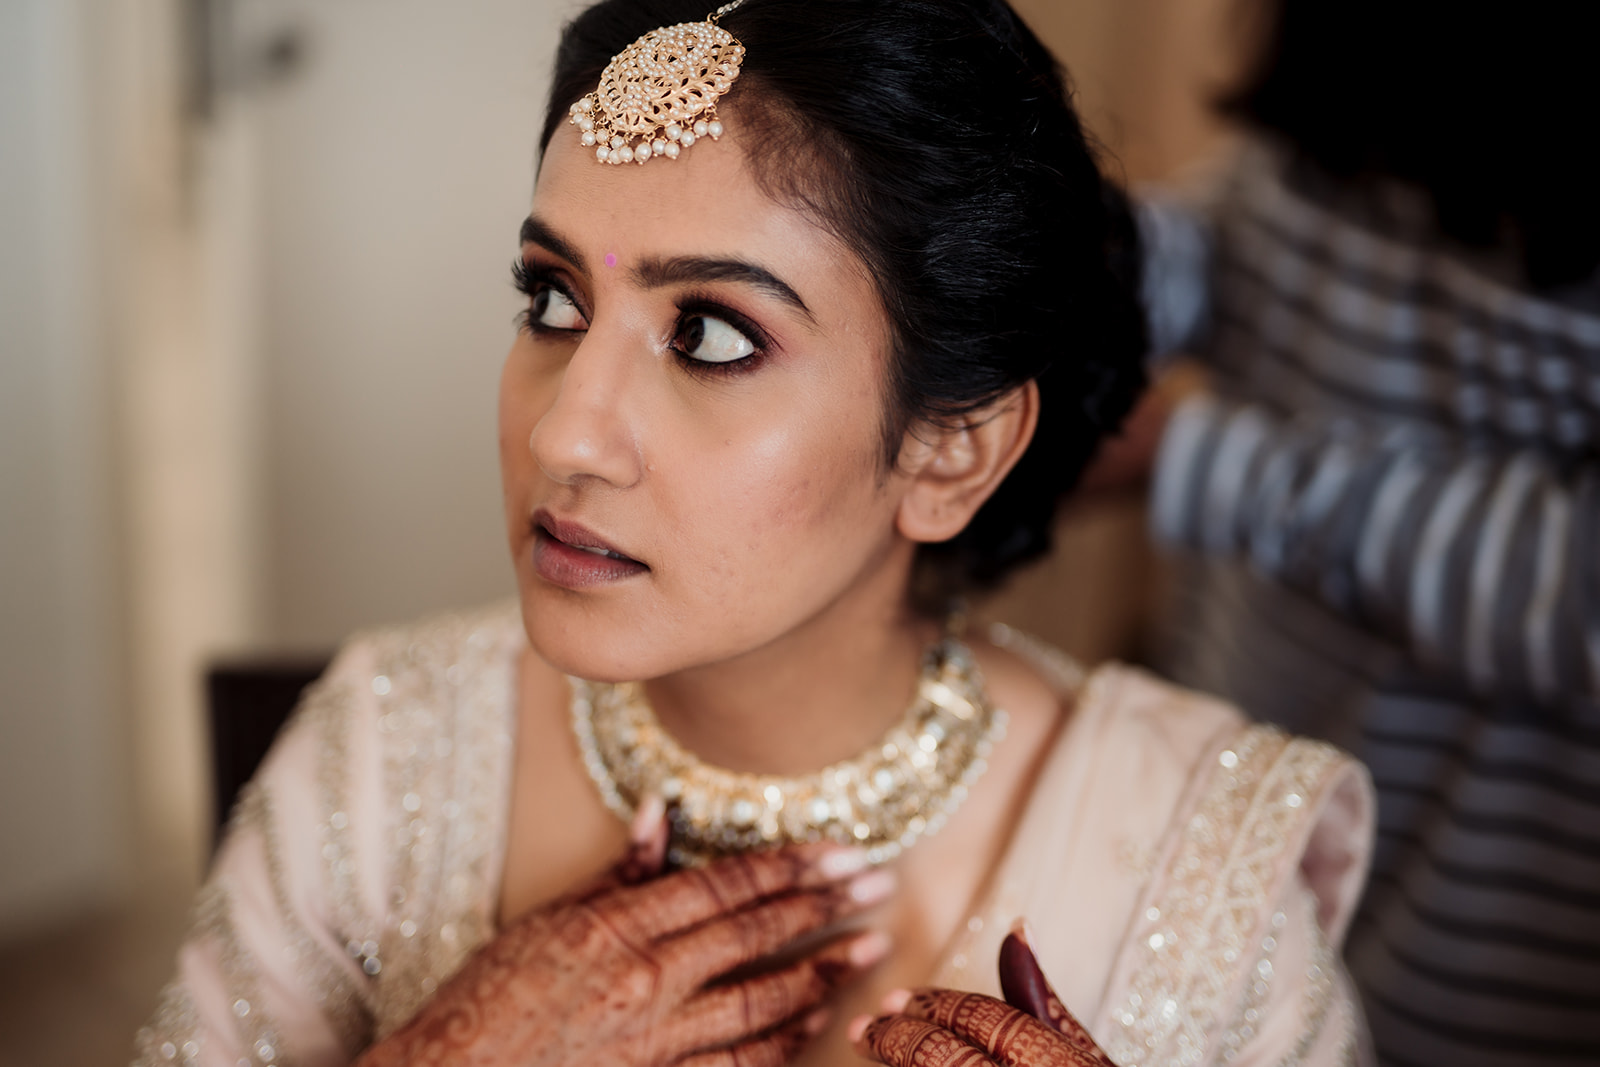 Bridal elegance: The bride shines in exquisite wedding jewelry, adding a touch of grace to her attire.